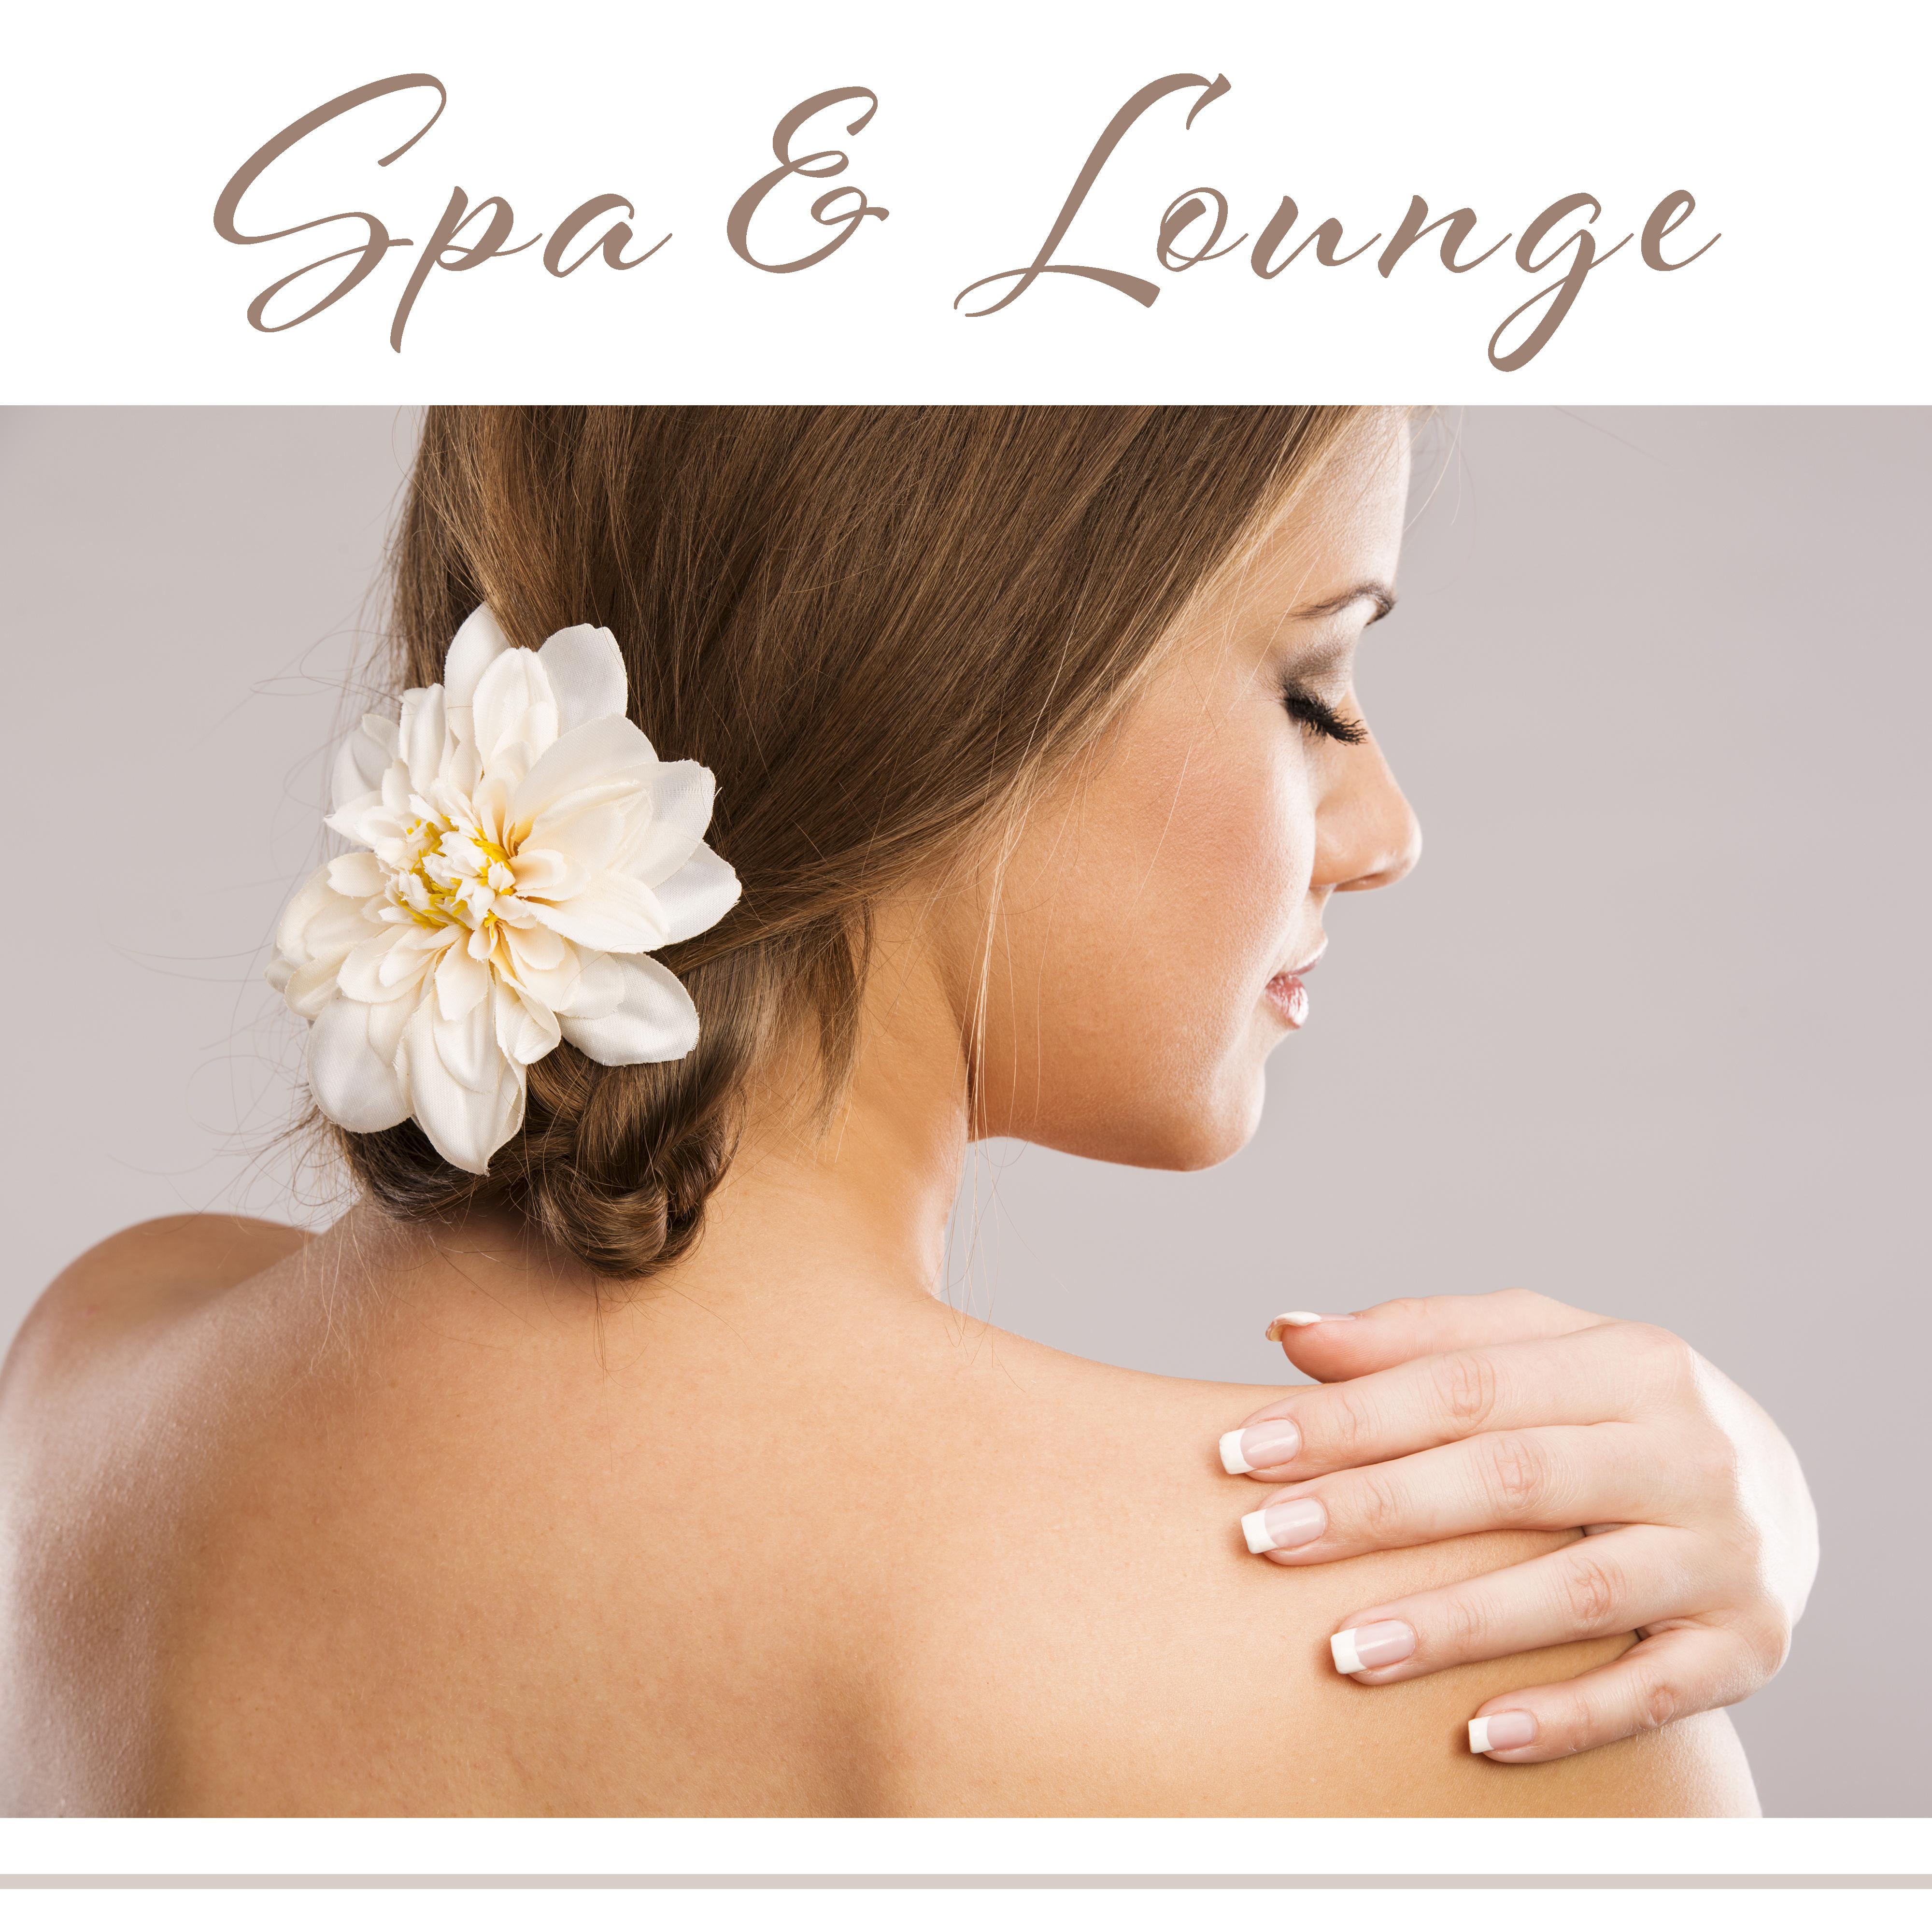 Spa & Lounge – Music for Massage, Nature Sounds, Calming Melodies of New Age Music, Spa Relaxation